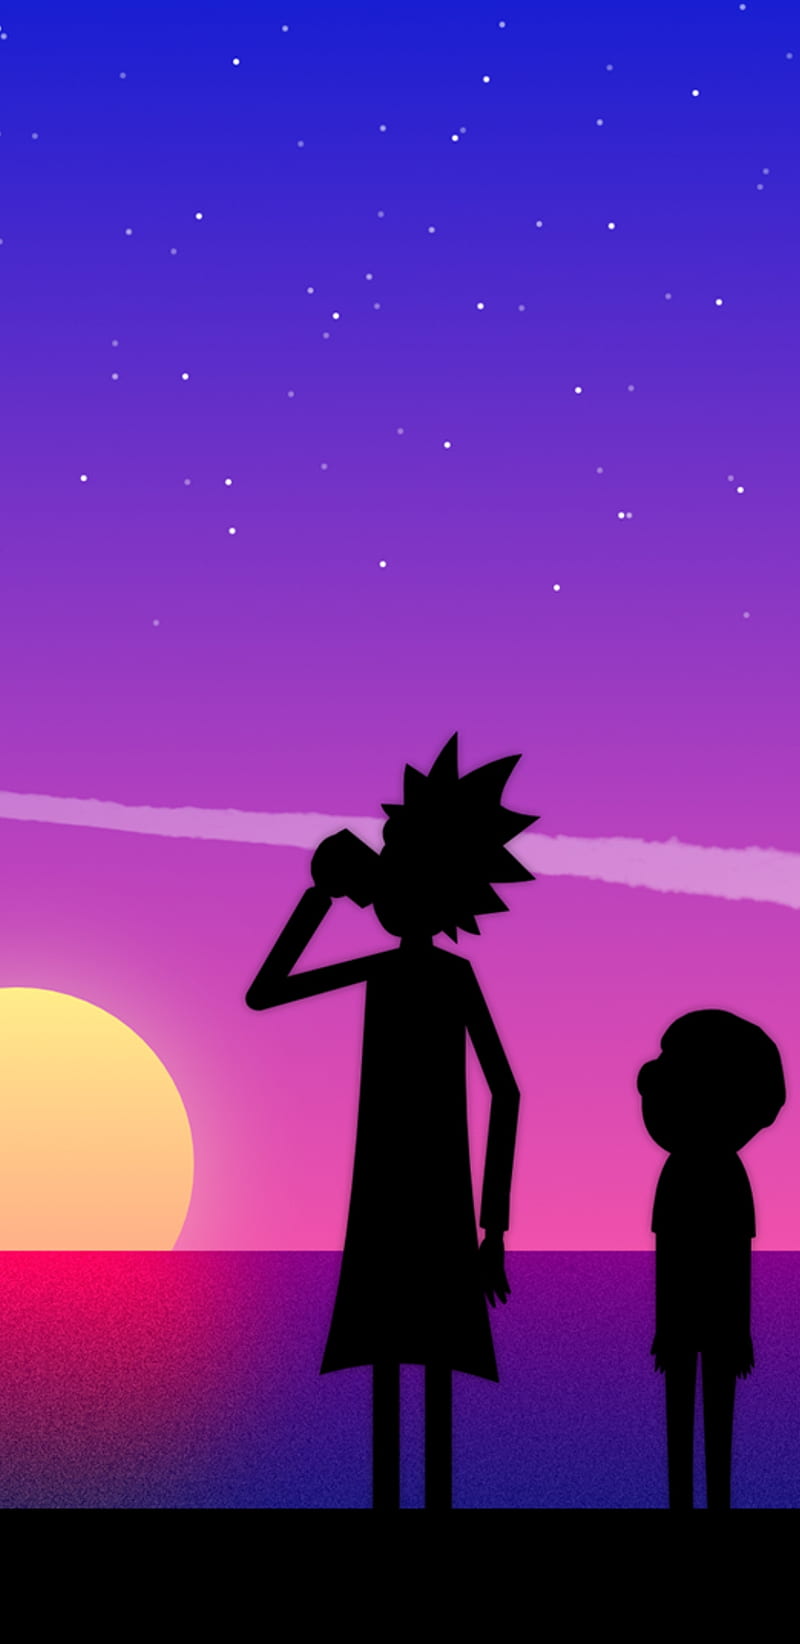 Rick and morty 1080P 2K 4K 5K HD wallpapers free download  Wallpaper  Flare